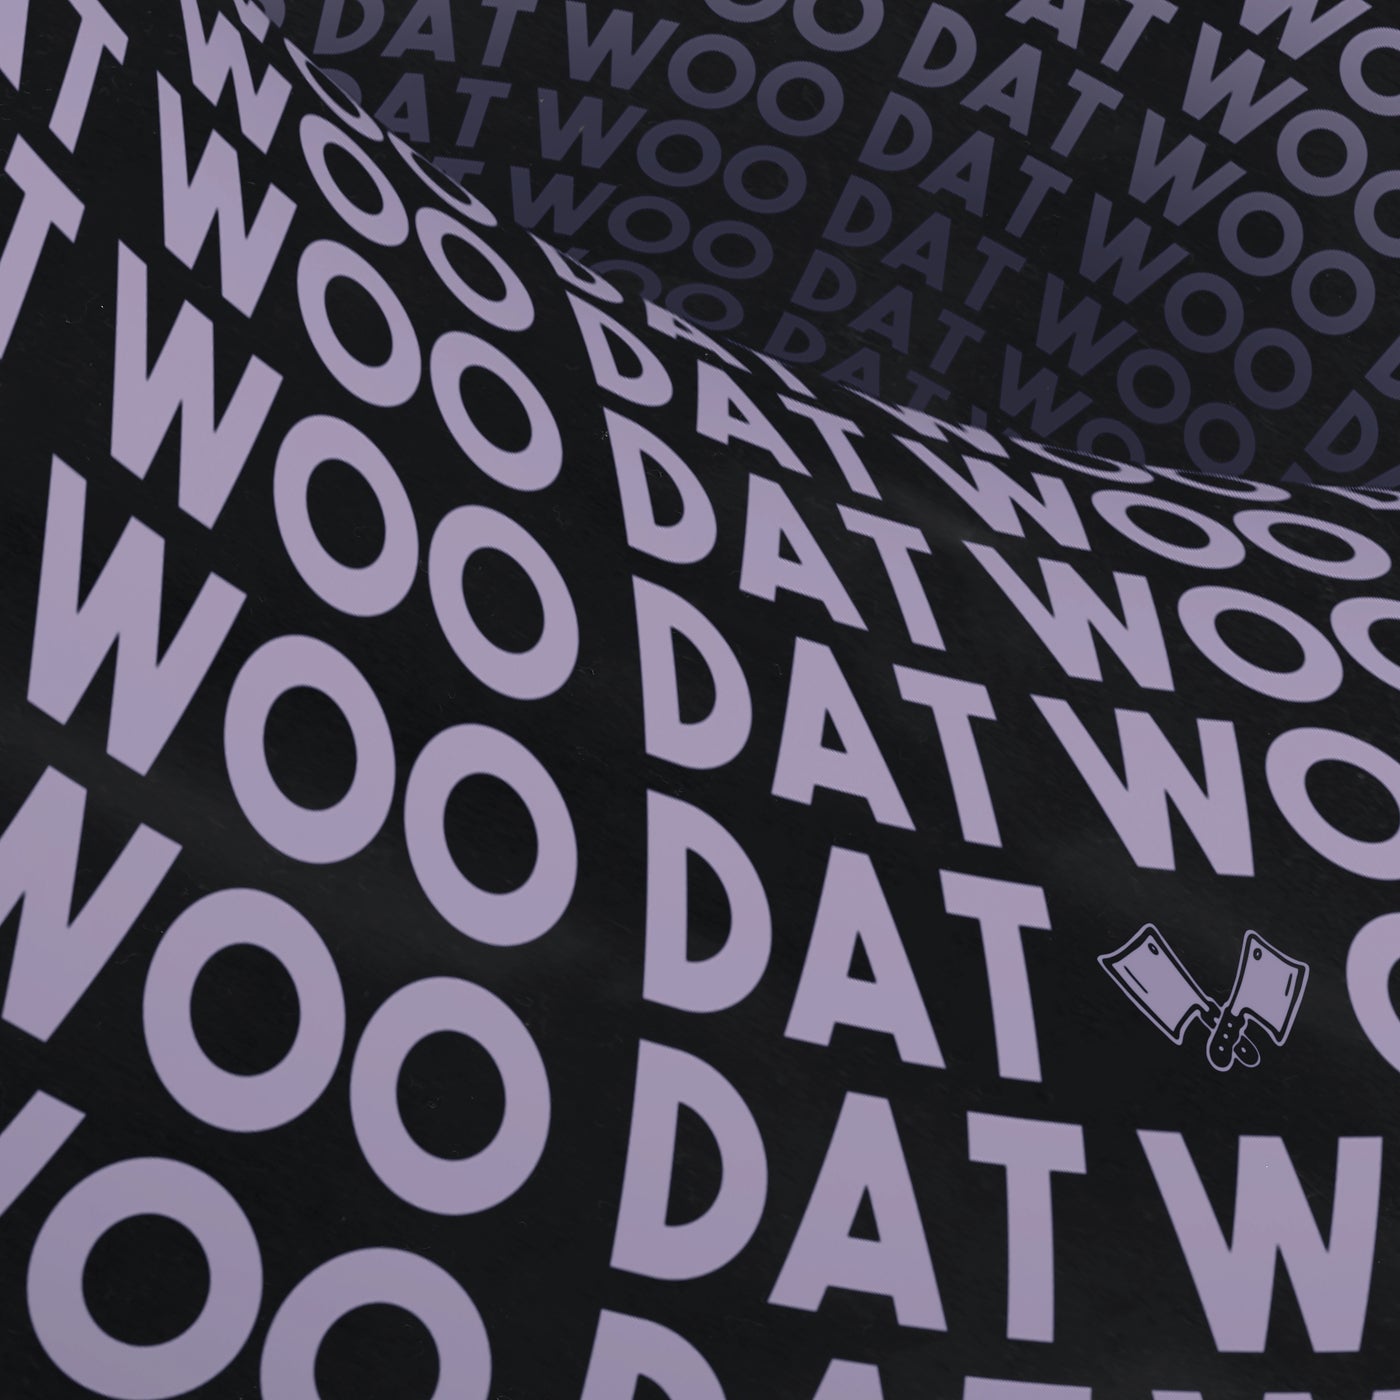 Download Woo Dat on Electrobuzz